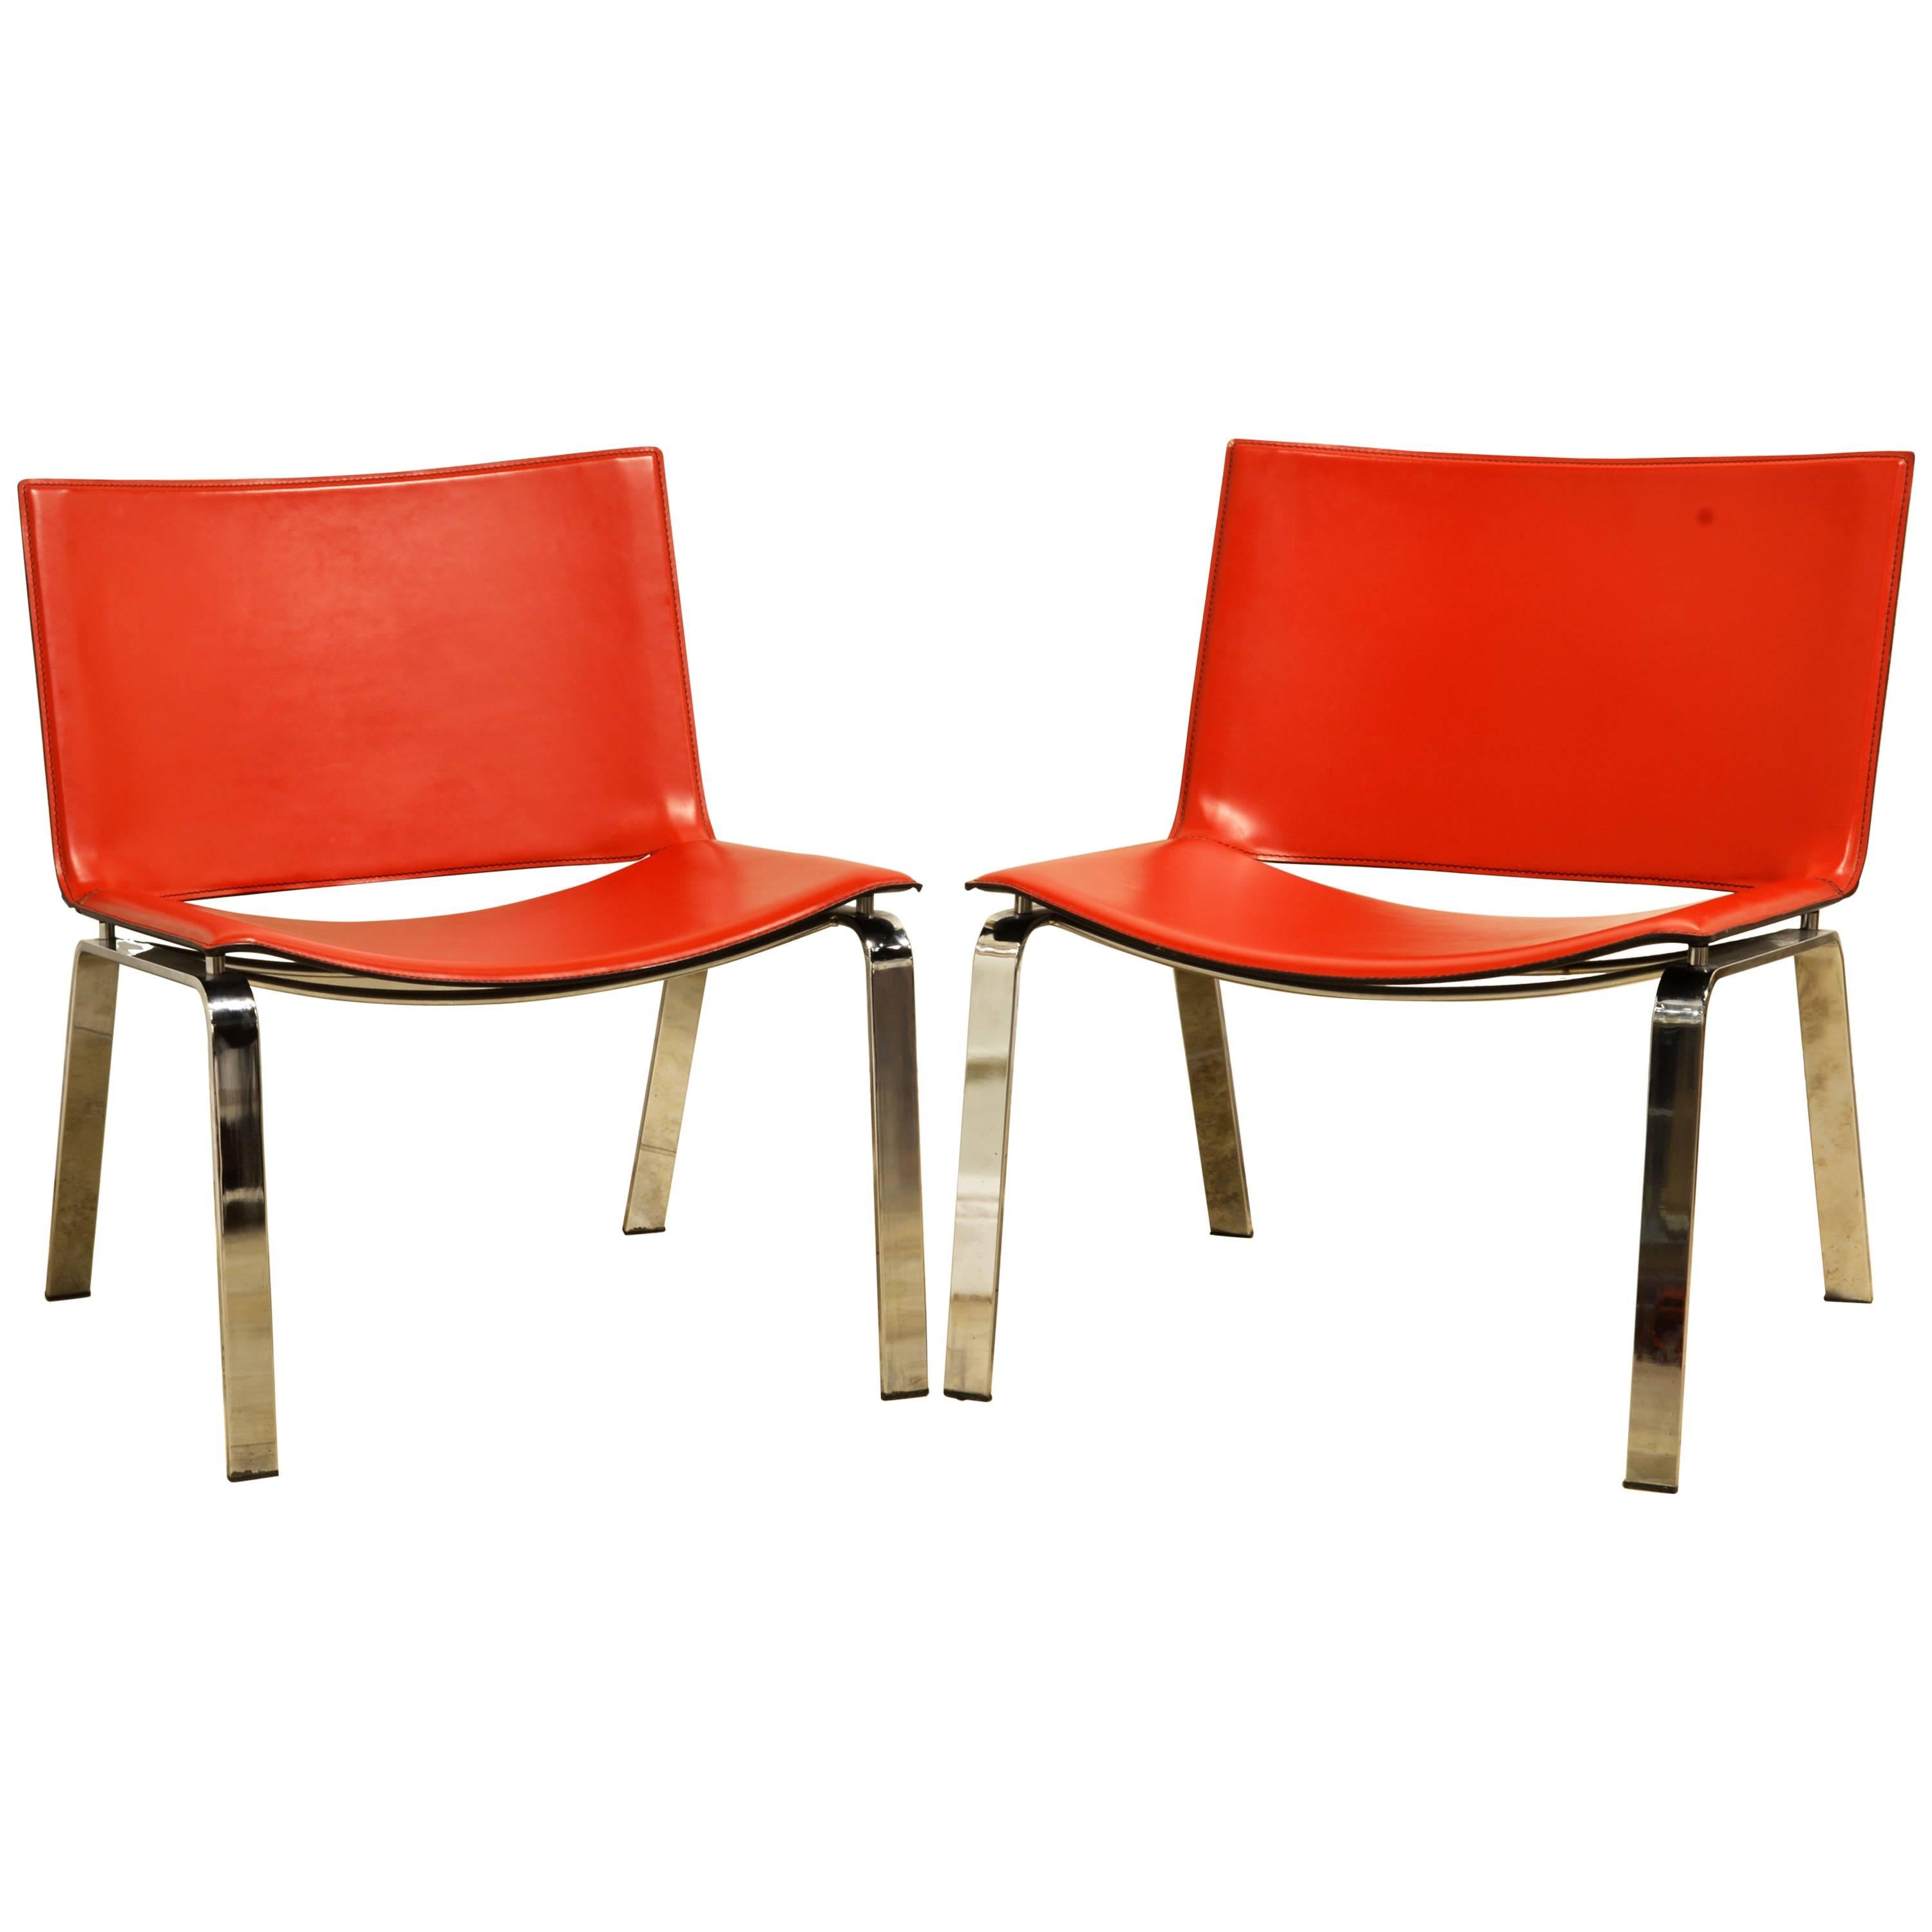 Pair of Italian Cattelan Lounge Chairs with Floating Seats on Chrome Legs